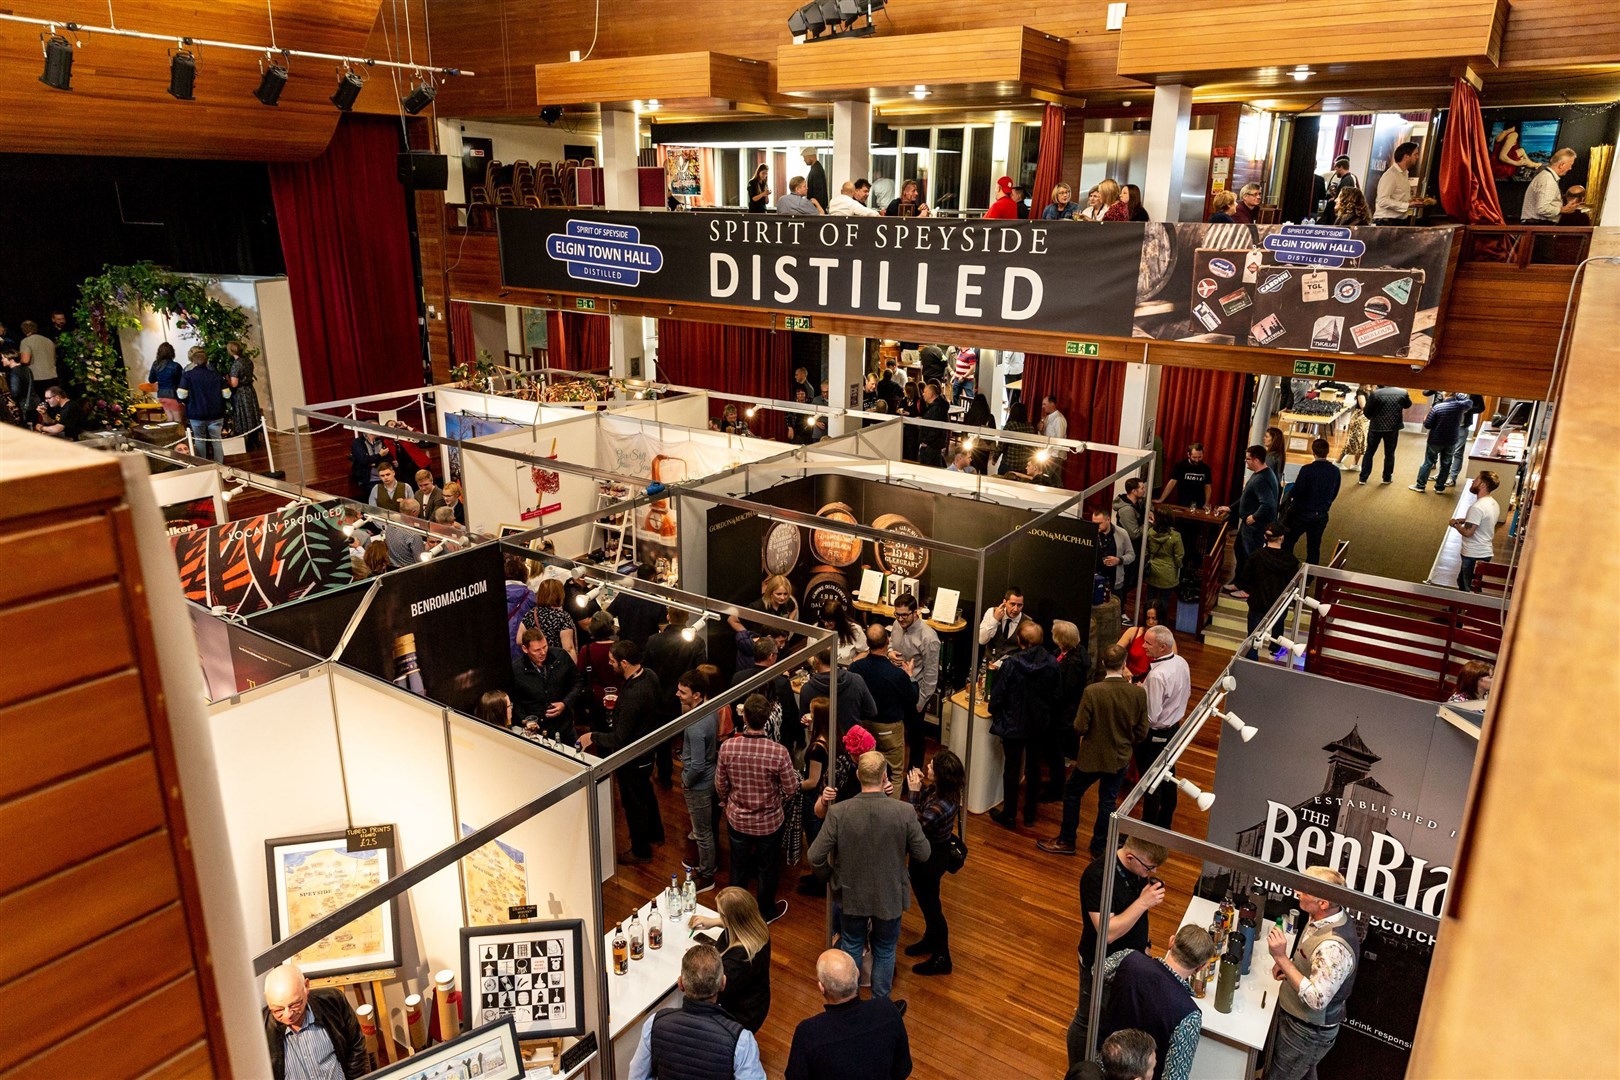 The distilled festival in Elgin Town Hall.